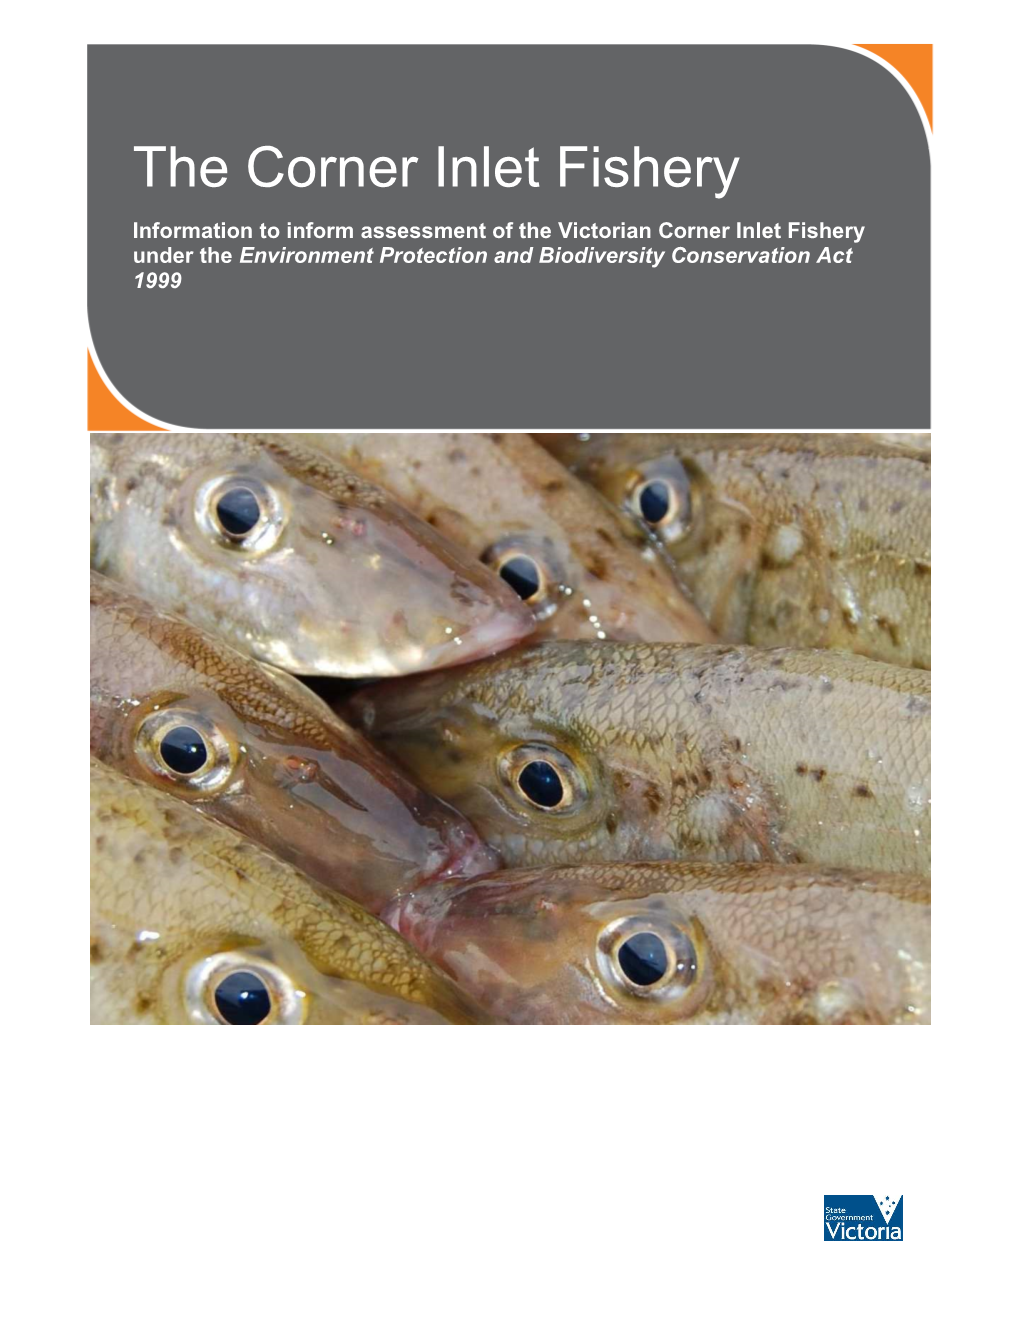 The Corner Inlet Fishery